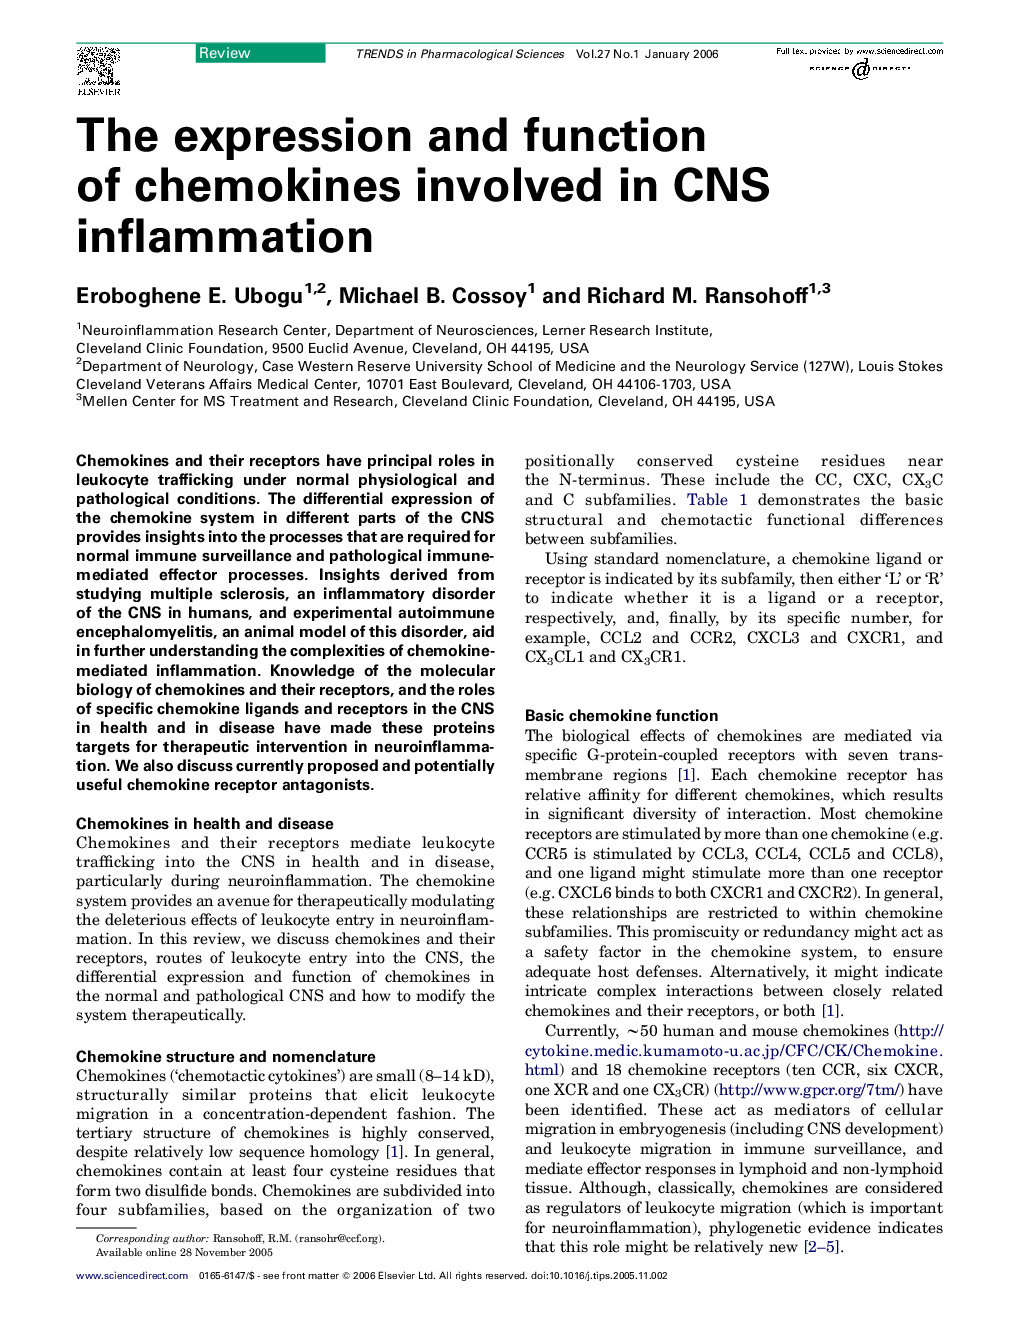 The expression and function of chemokines involved in CNS inflammation